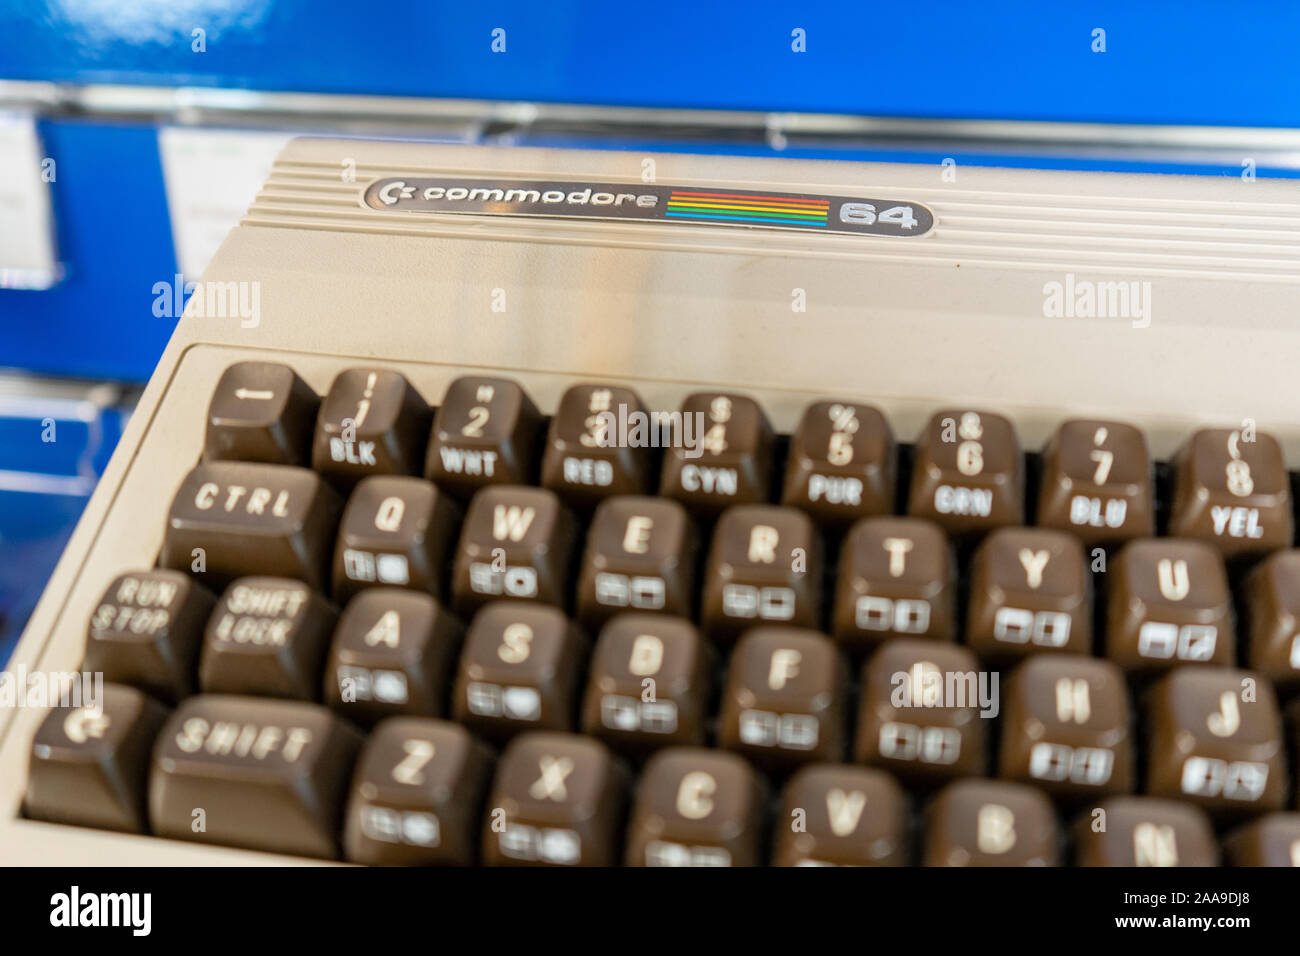 A close up of the keyboard on a commodore 64 computer from the 1980's Stock Photo